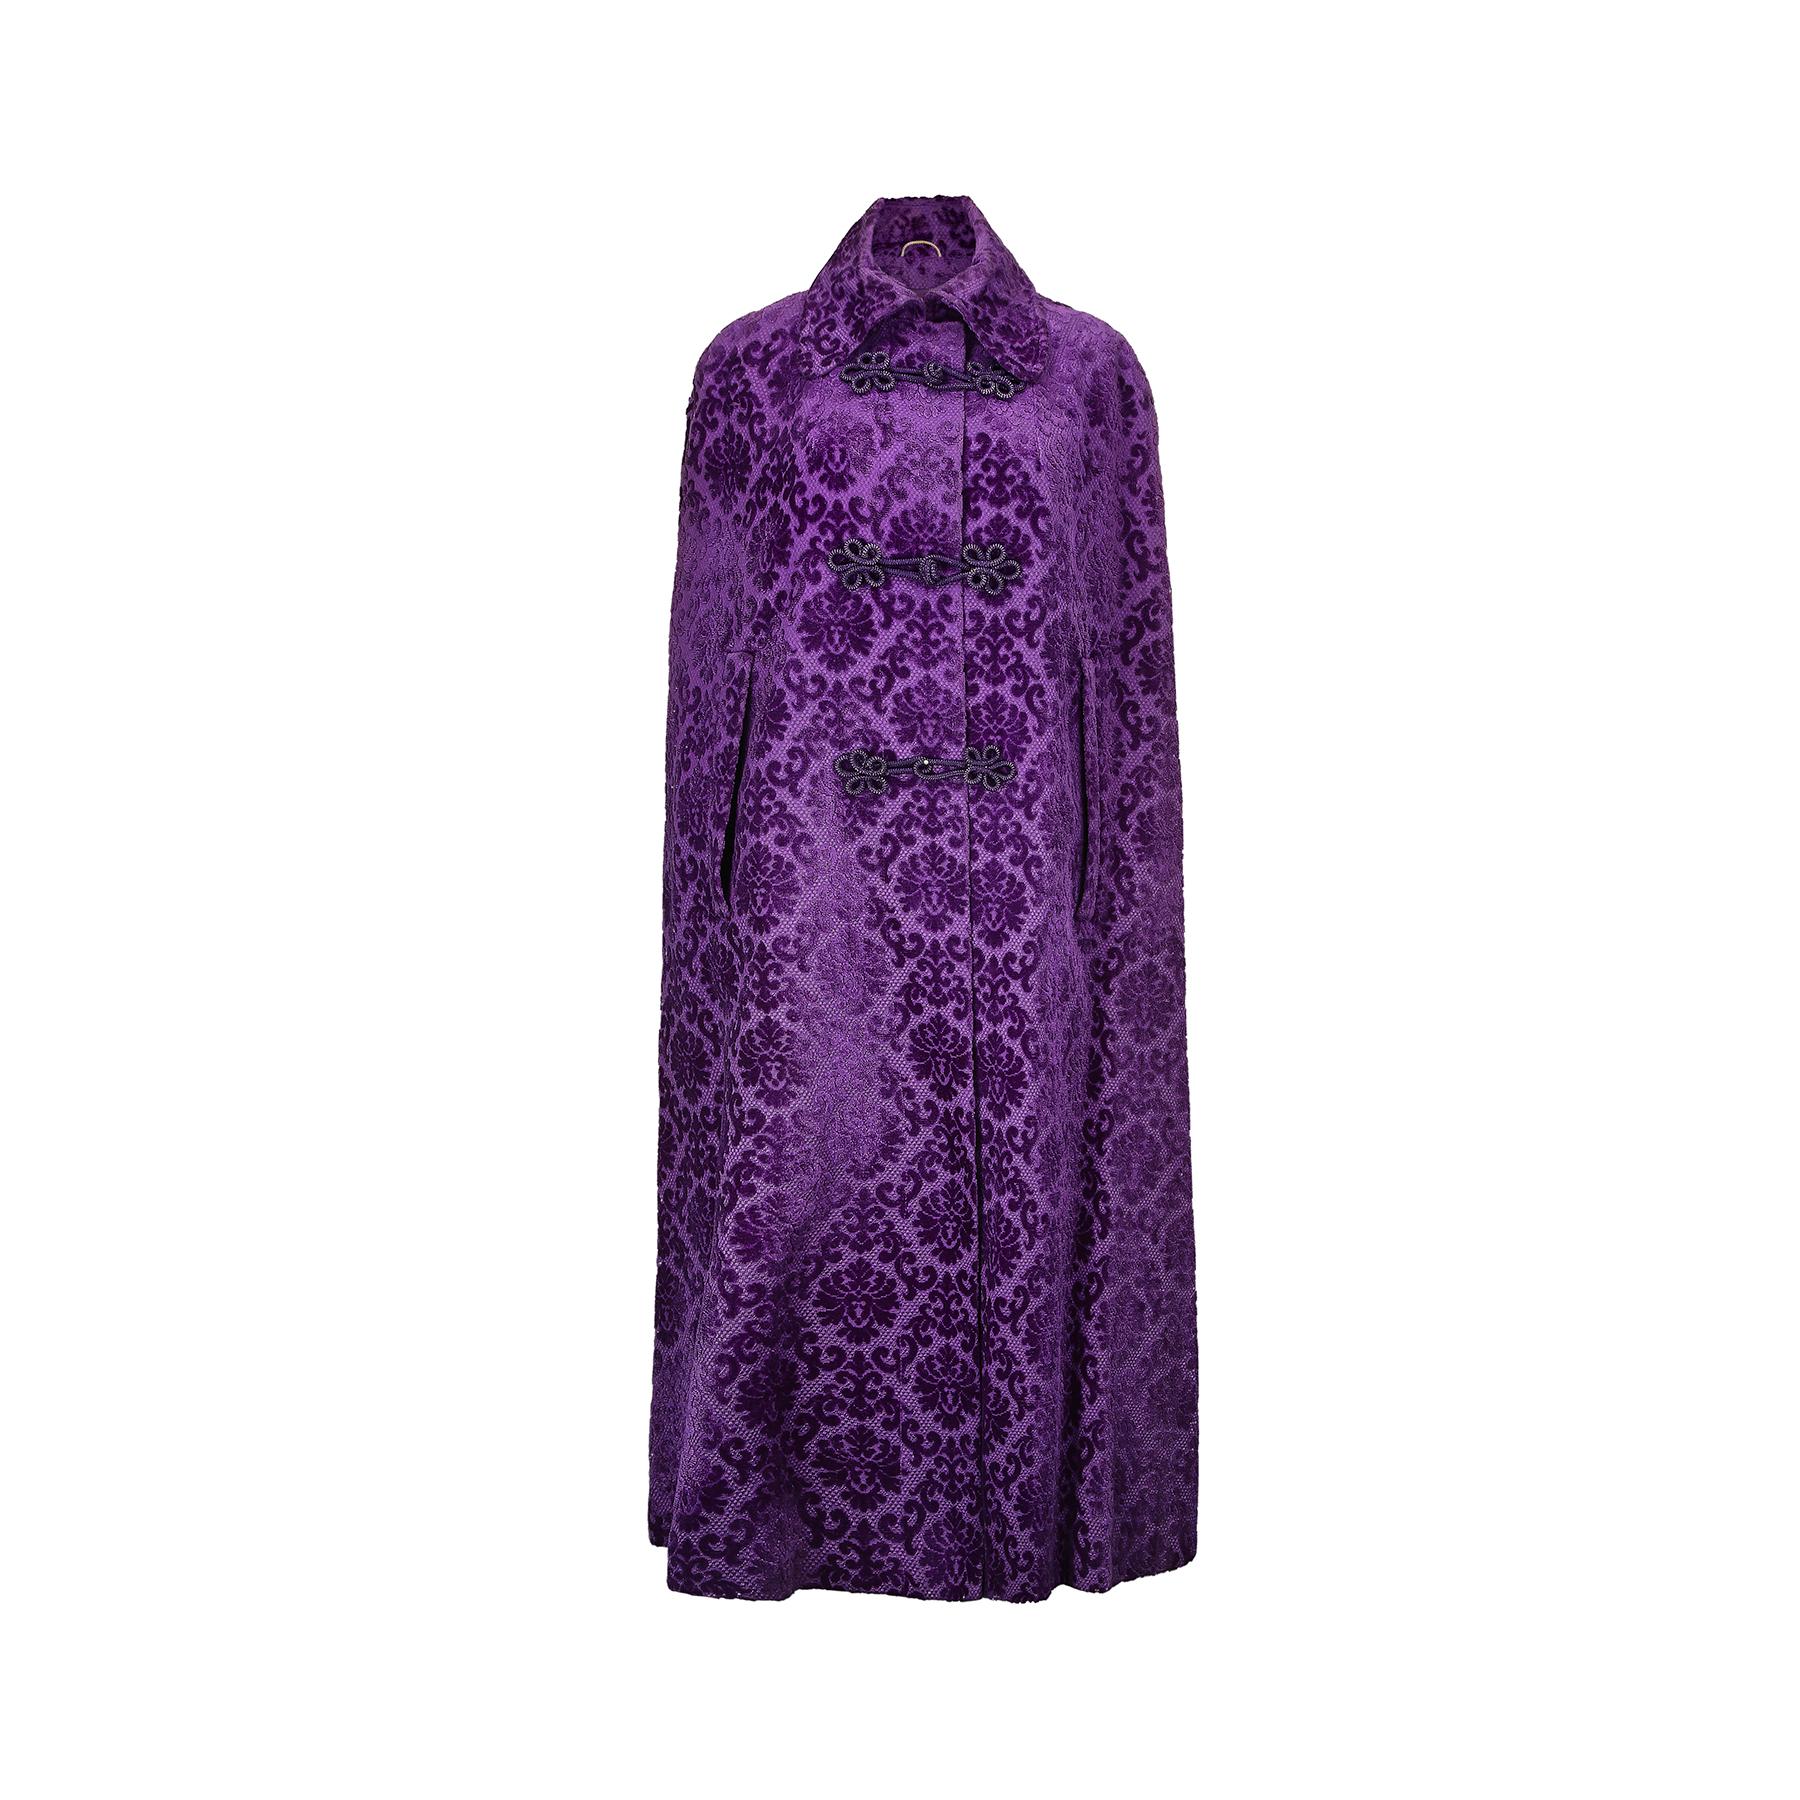 This purple embossed velvet cape was made in England during the height of the swinging 60s London boutique scene by Carnaby Street designer, Barry Sherrard. It features a large rounded collar, with a mixture of buttons and thick rope frog fastenings